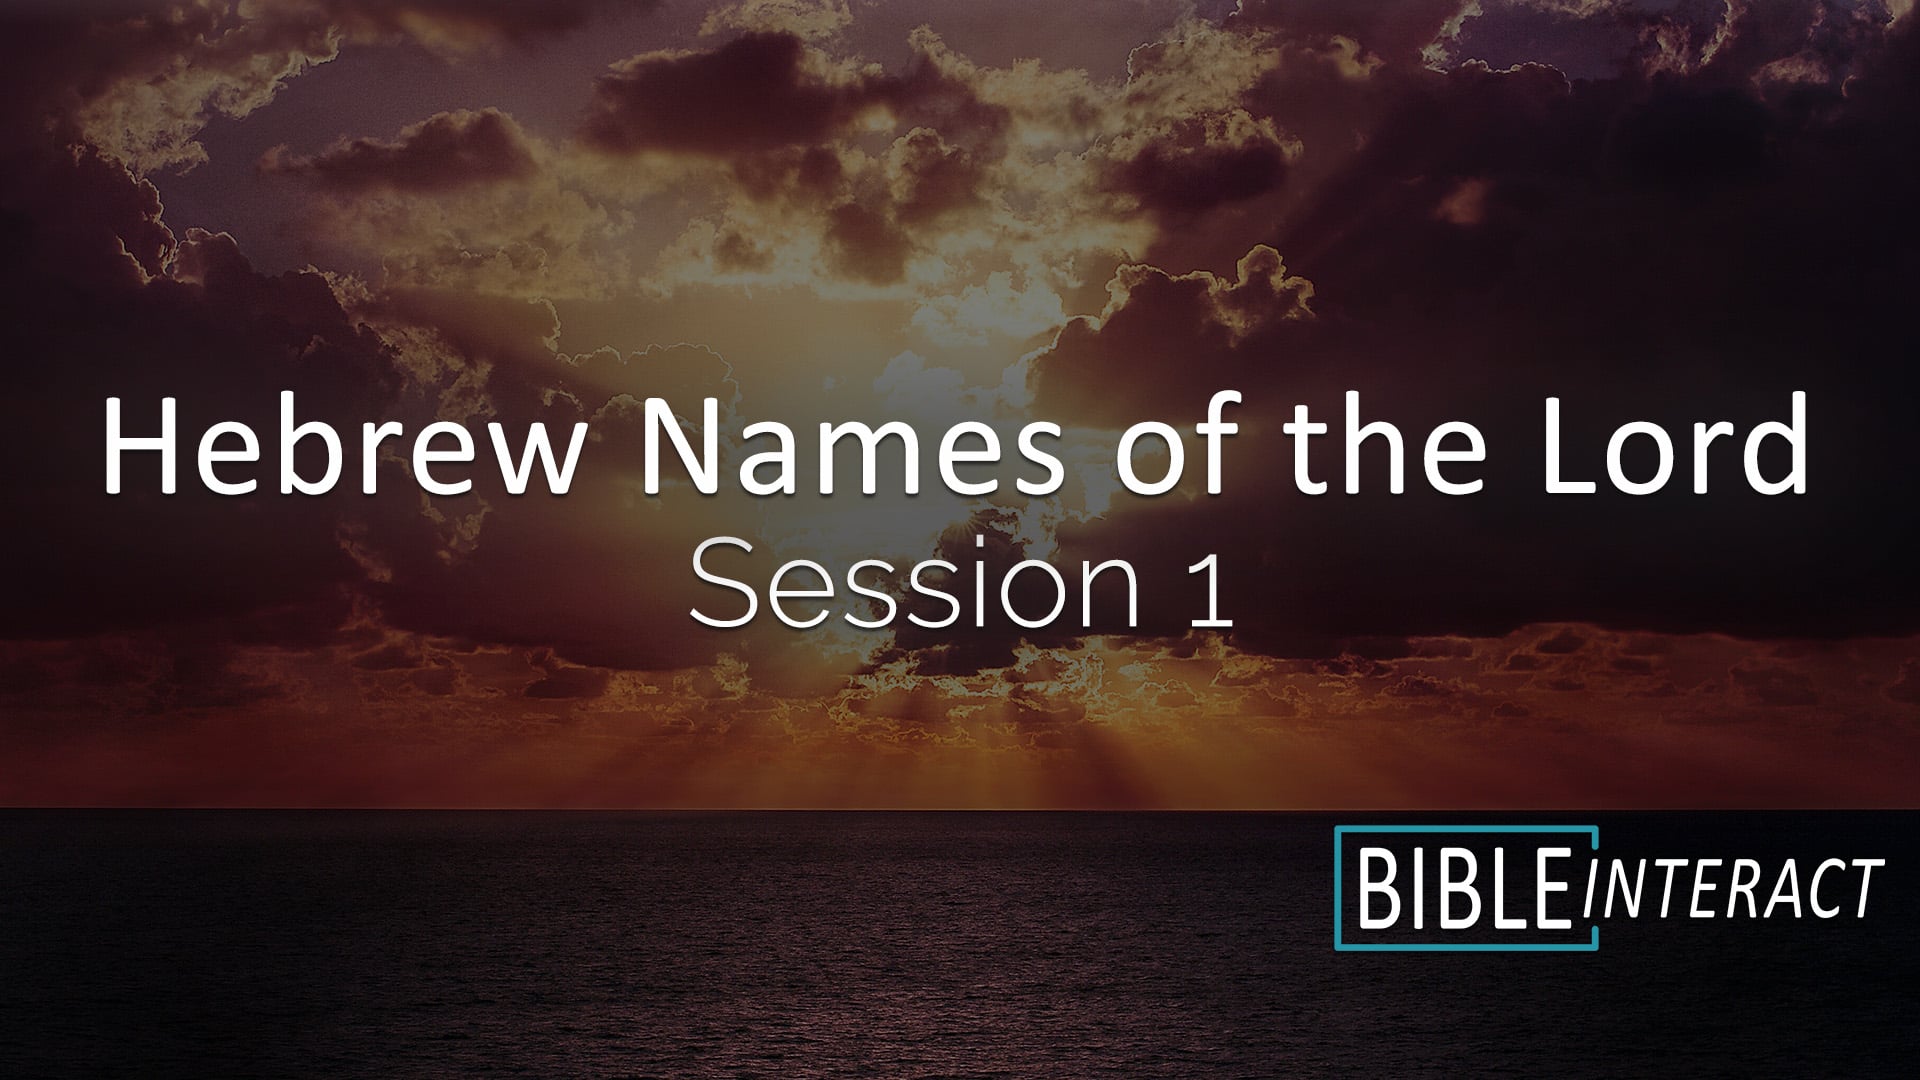 ▶️ Hebrew Names of the Lord Session 1